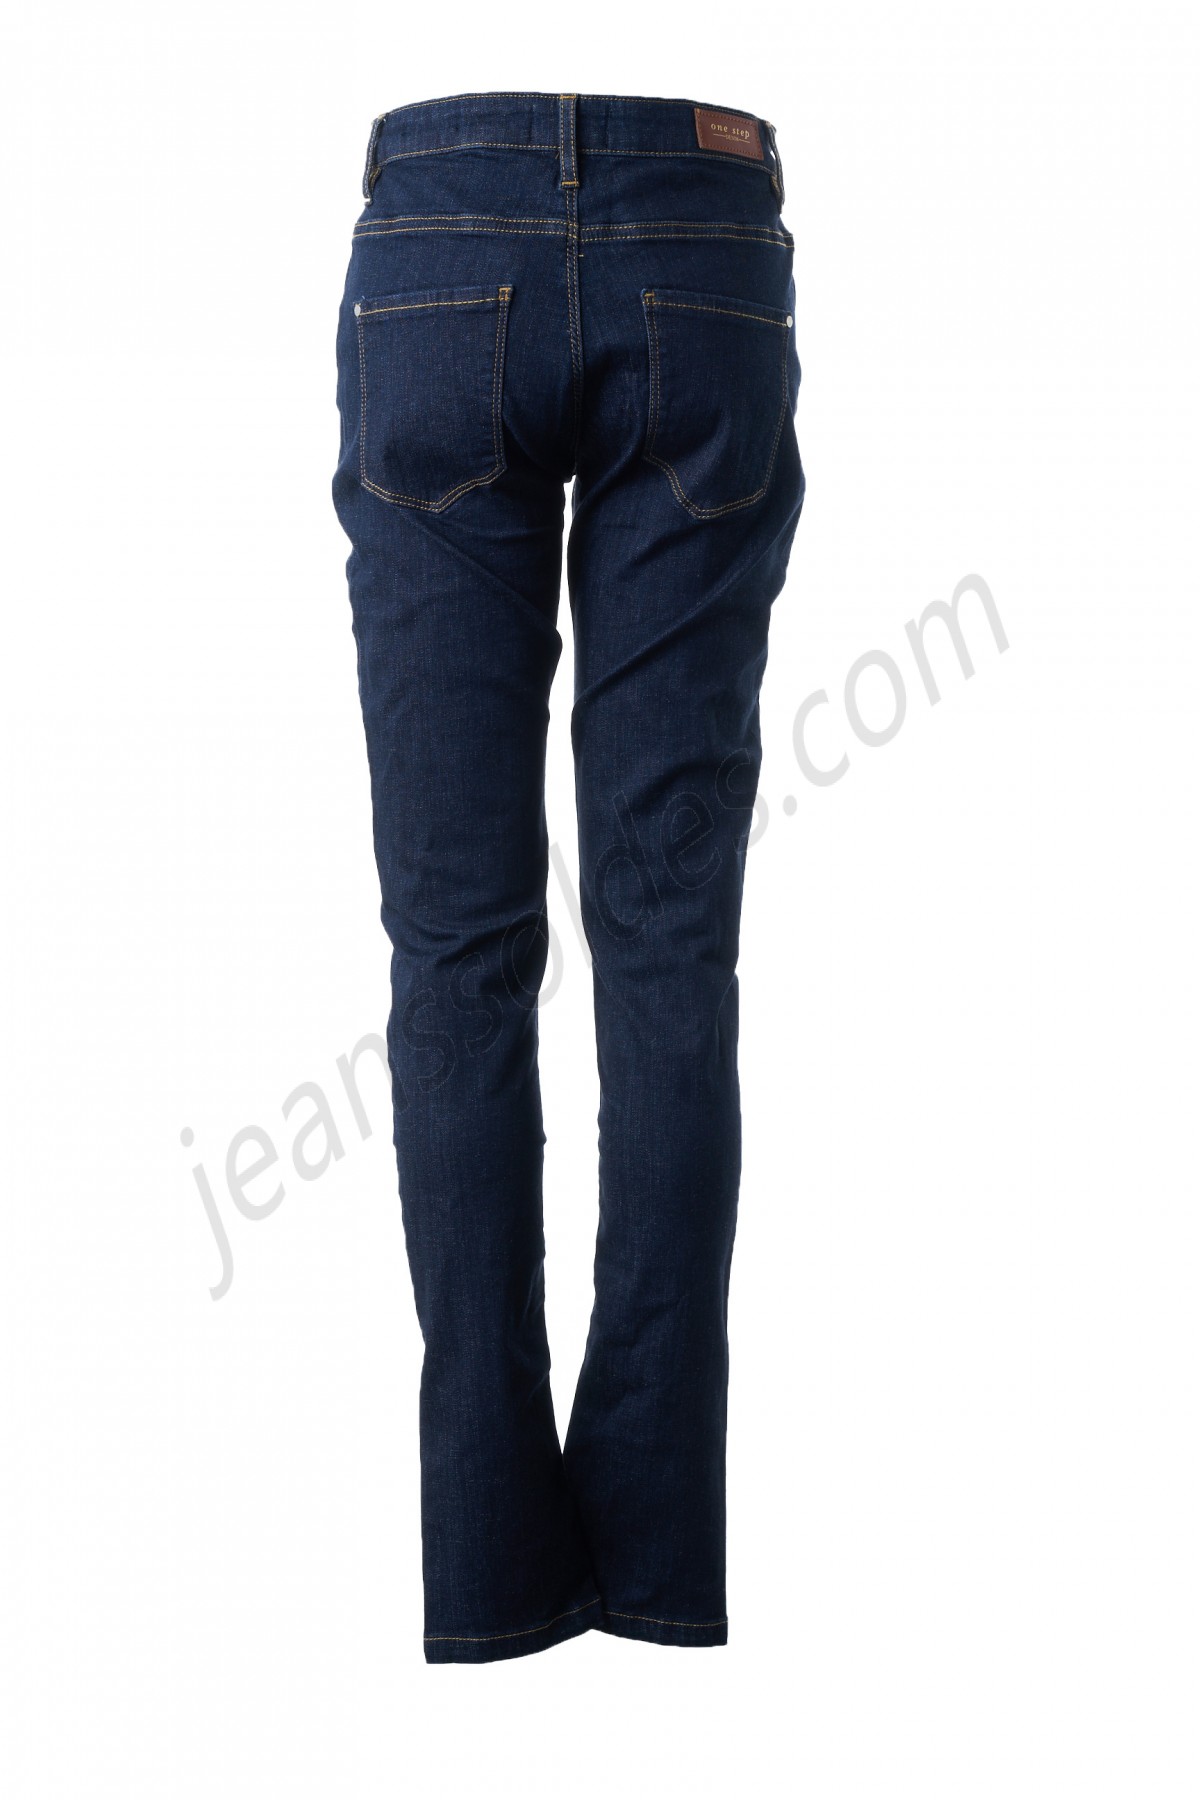 one step-Jeans coupe slim prix d’amis - -1